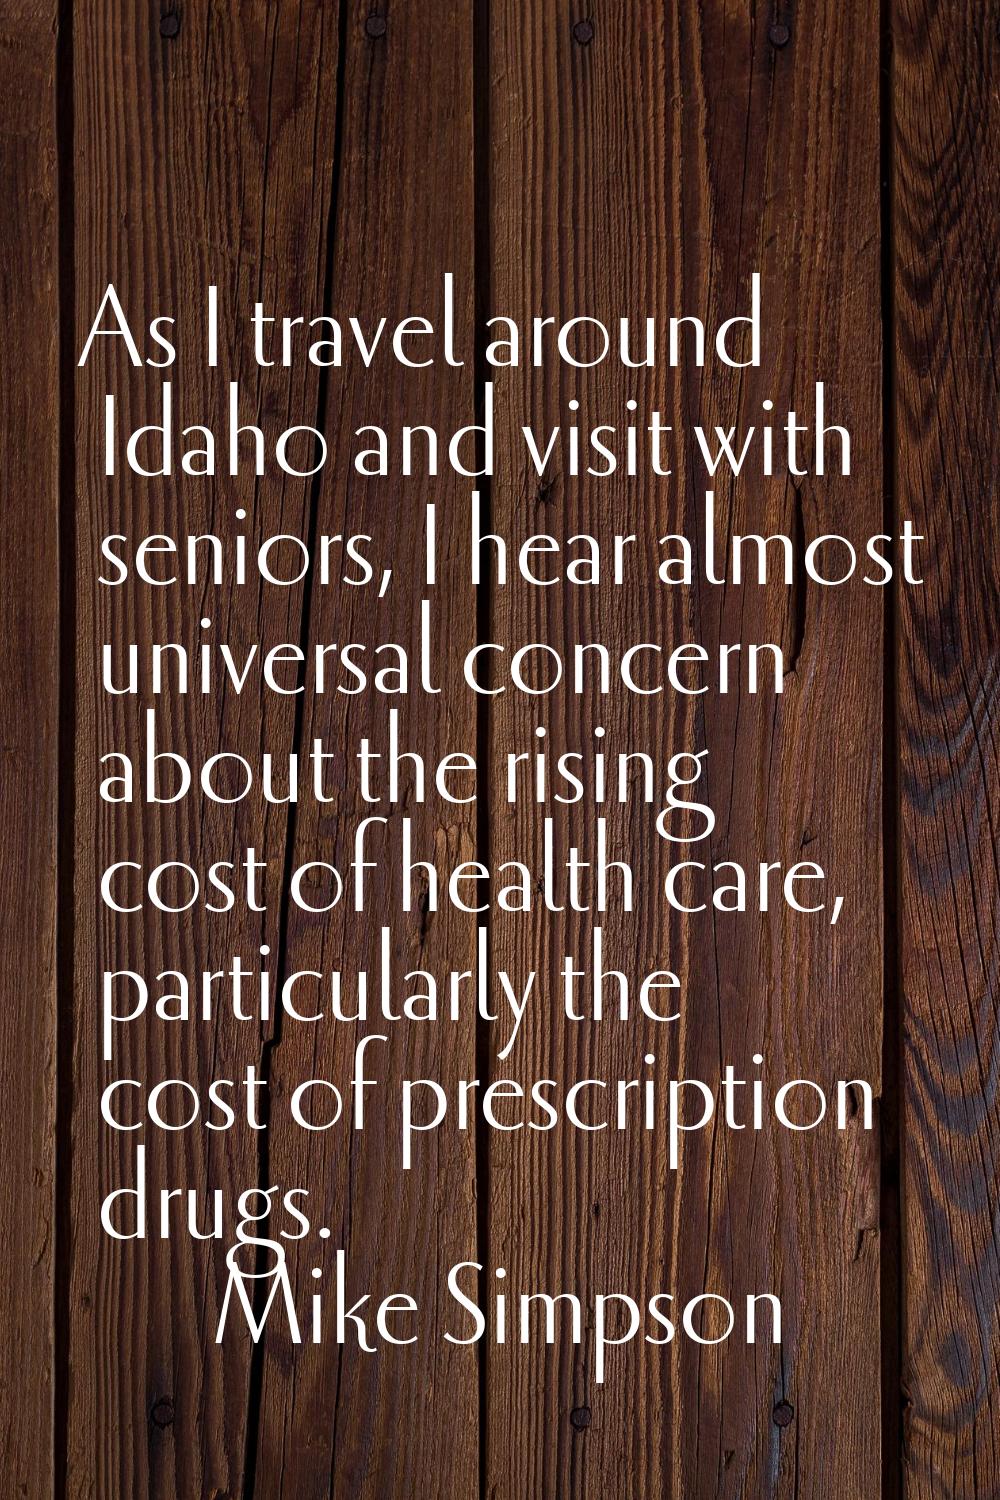 As I travel around Idaho and visit with seniors, I hear almost universal concern about the rising c